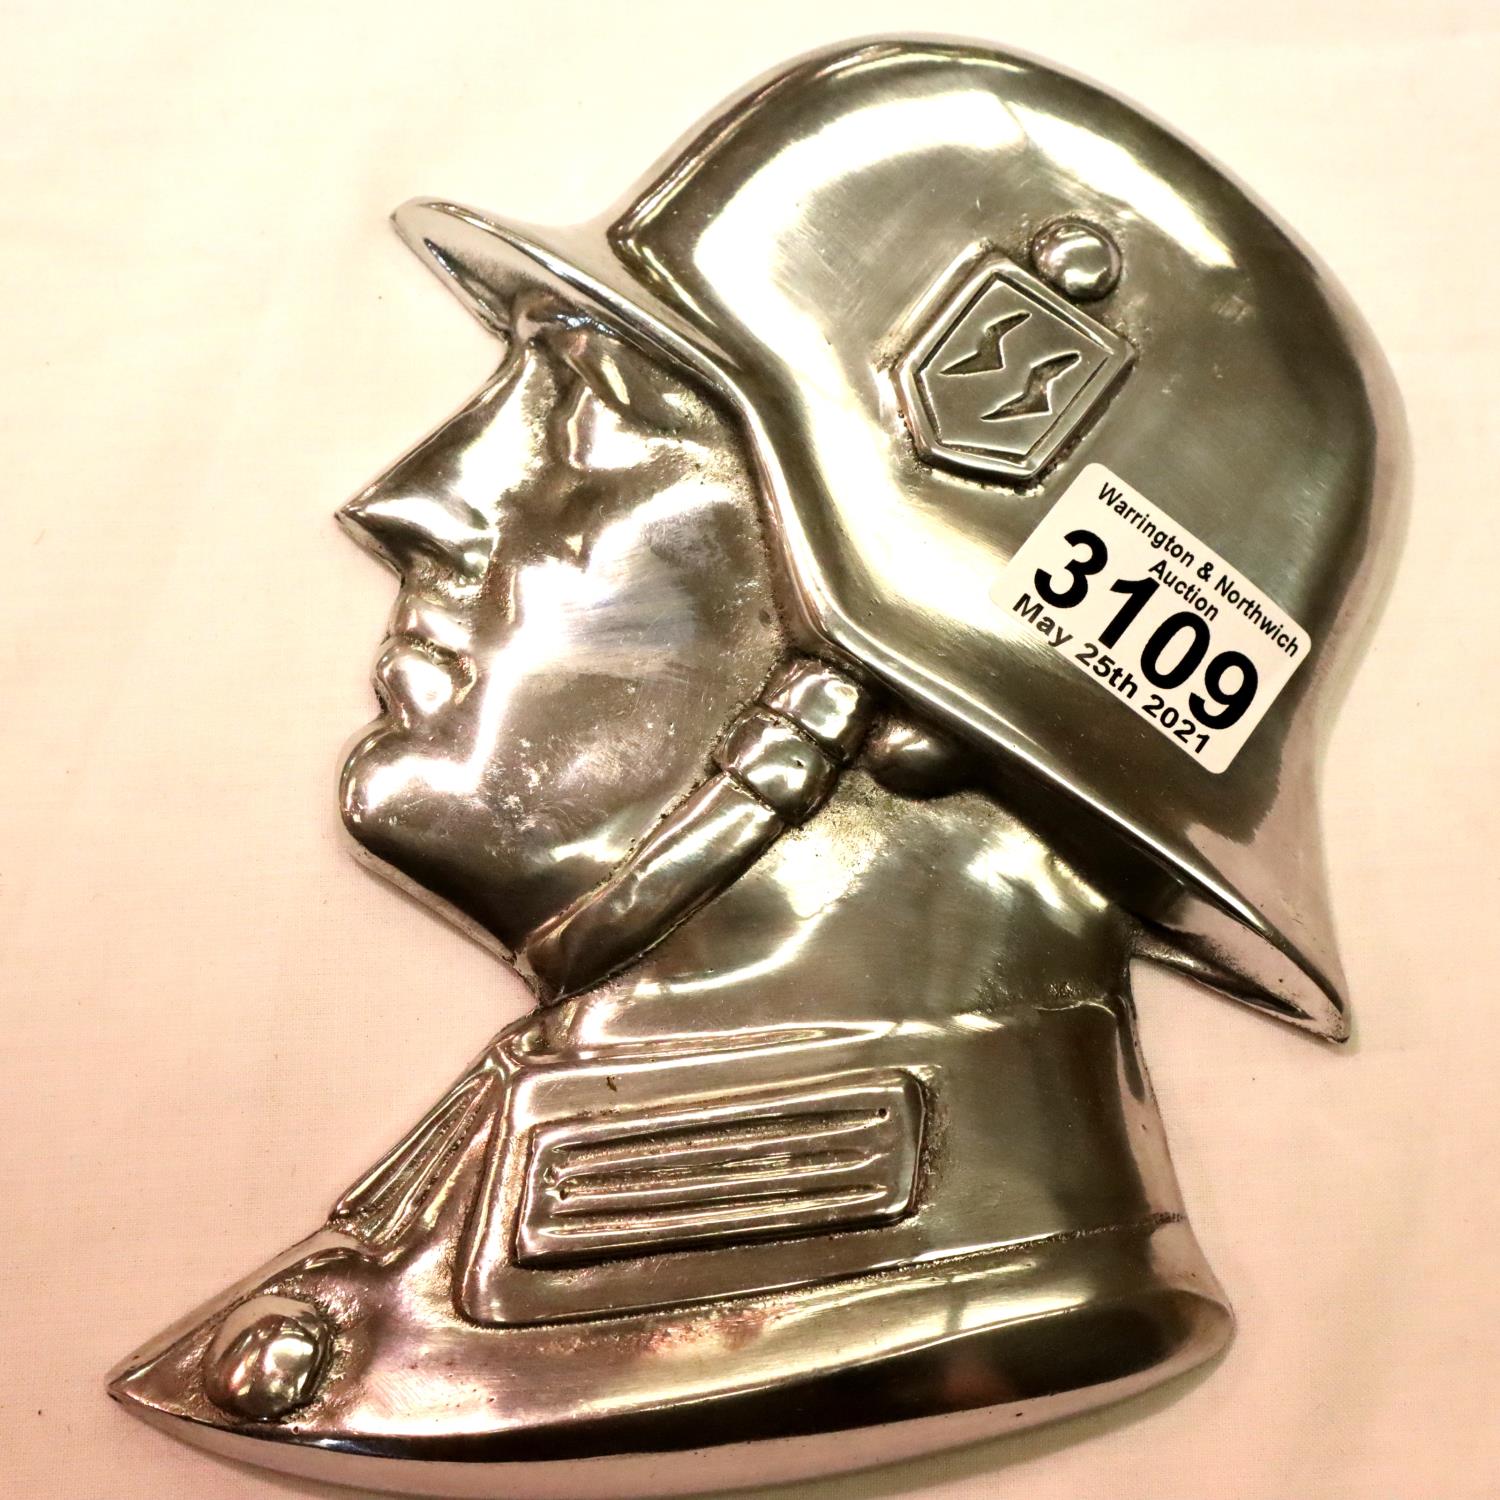 A polished metal SS soldiers side profile, wall or door mounting with threaded holes verso, H: 21